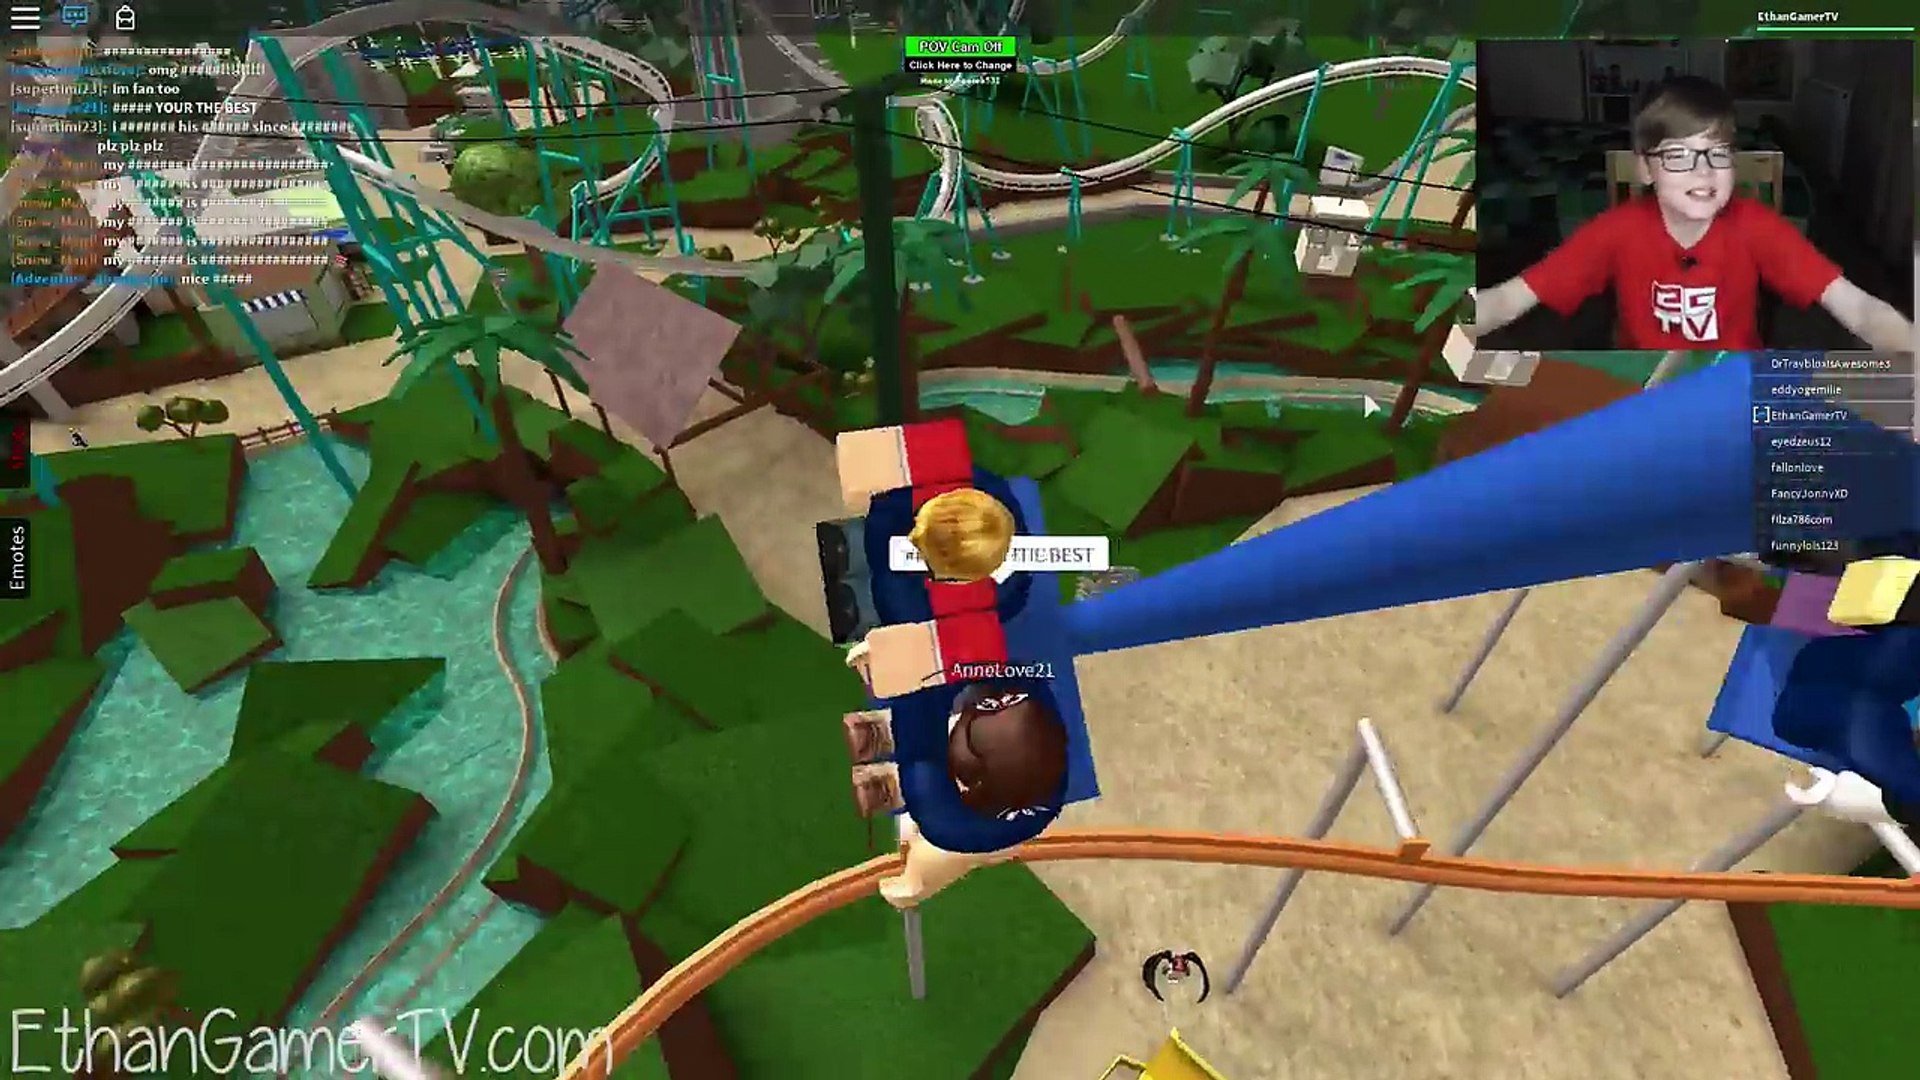 Team Egtv Takes Over Roblox Point - if minecraft took over roblox